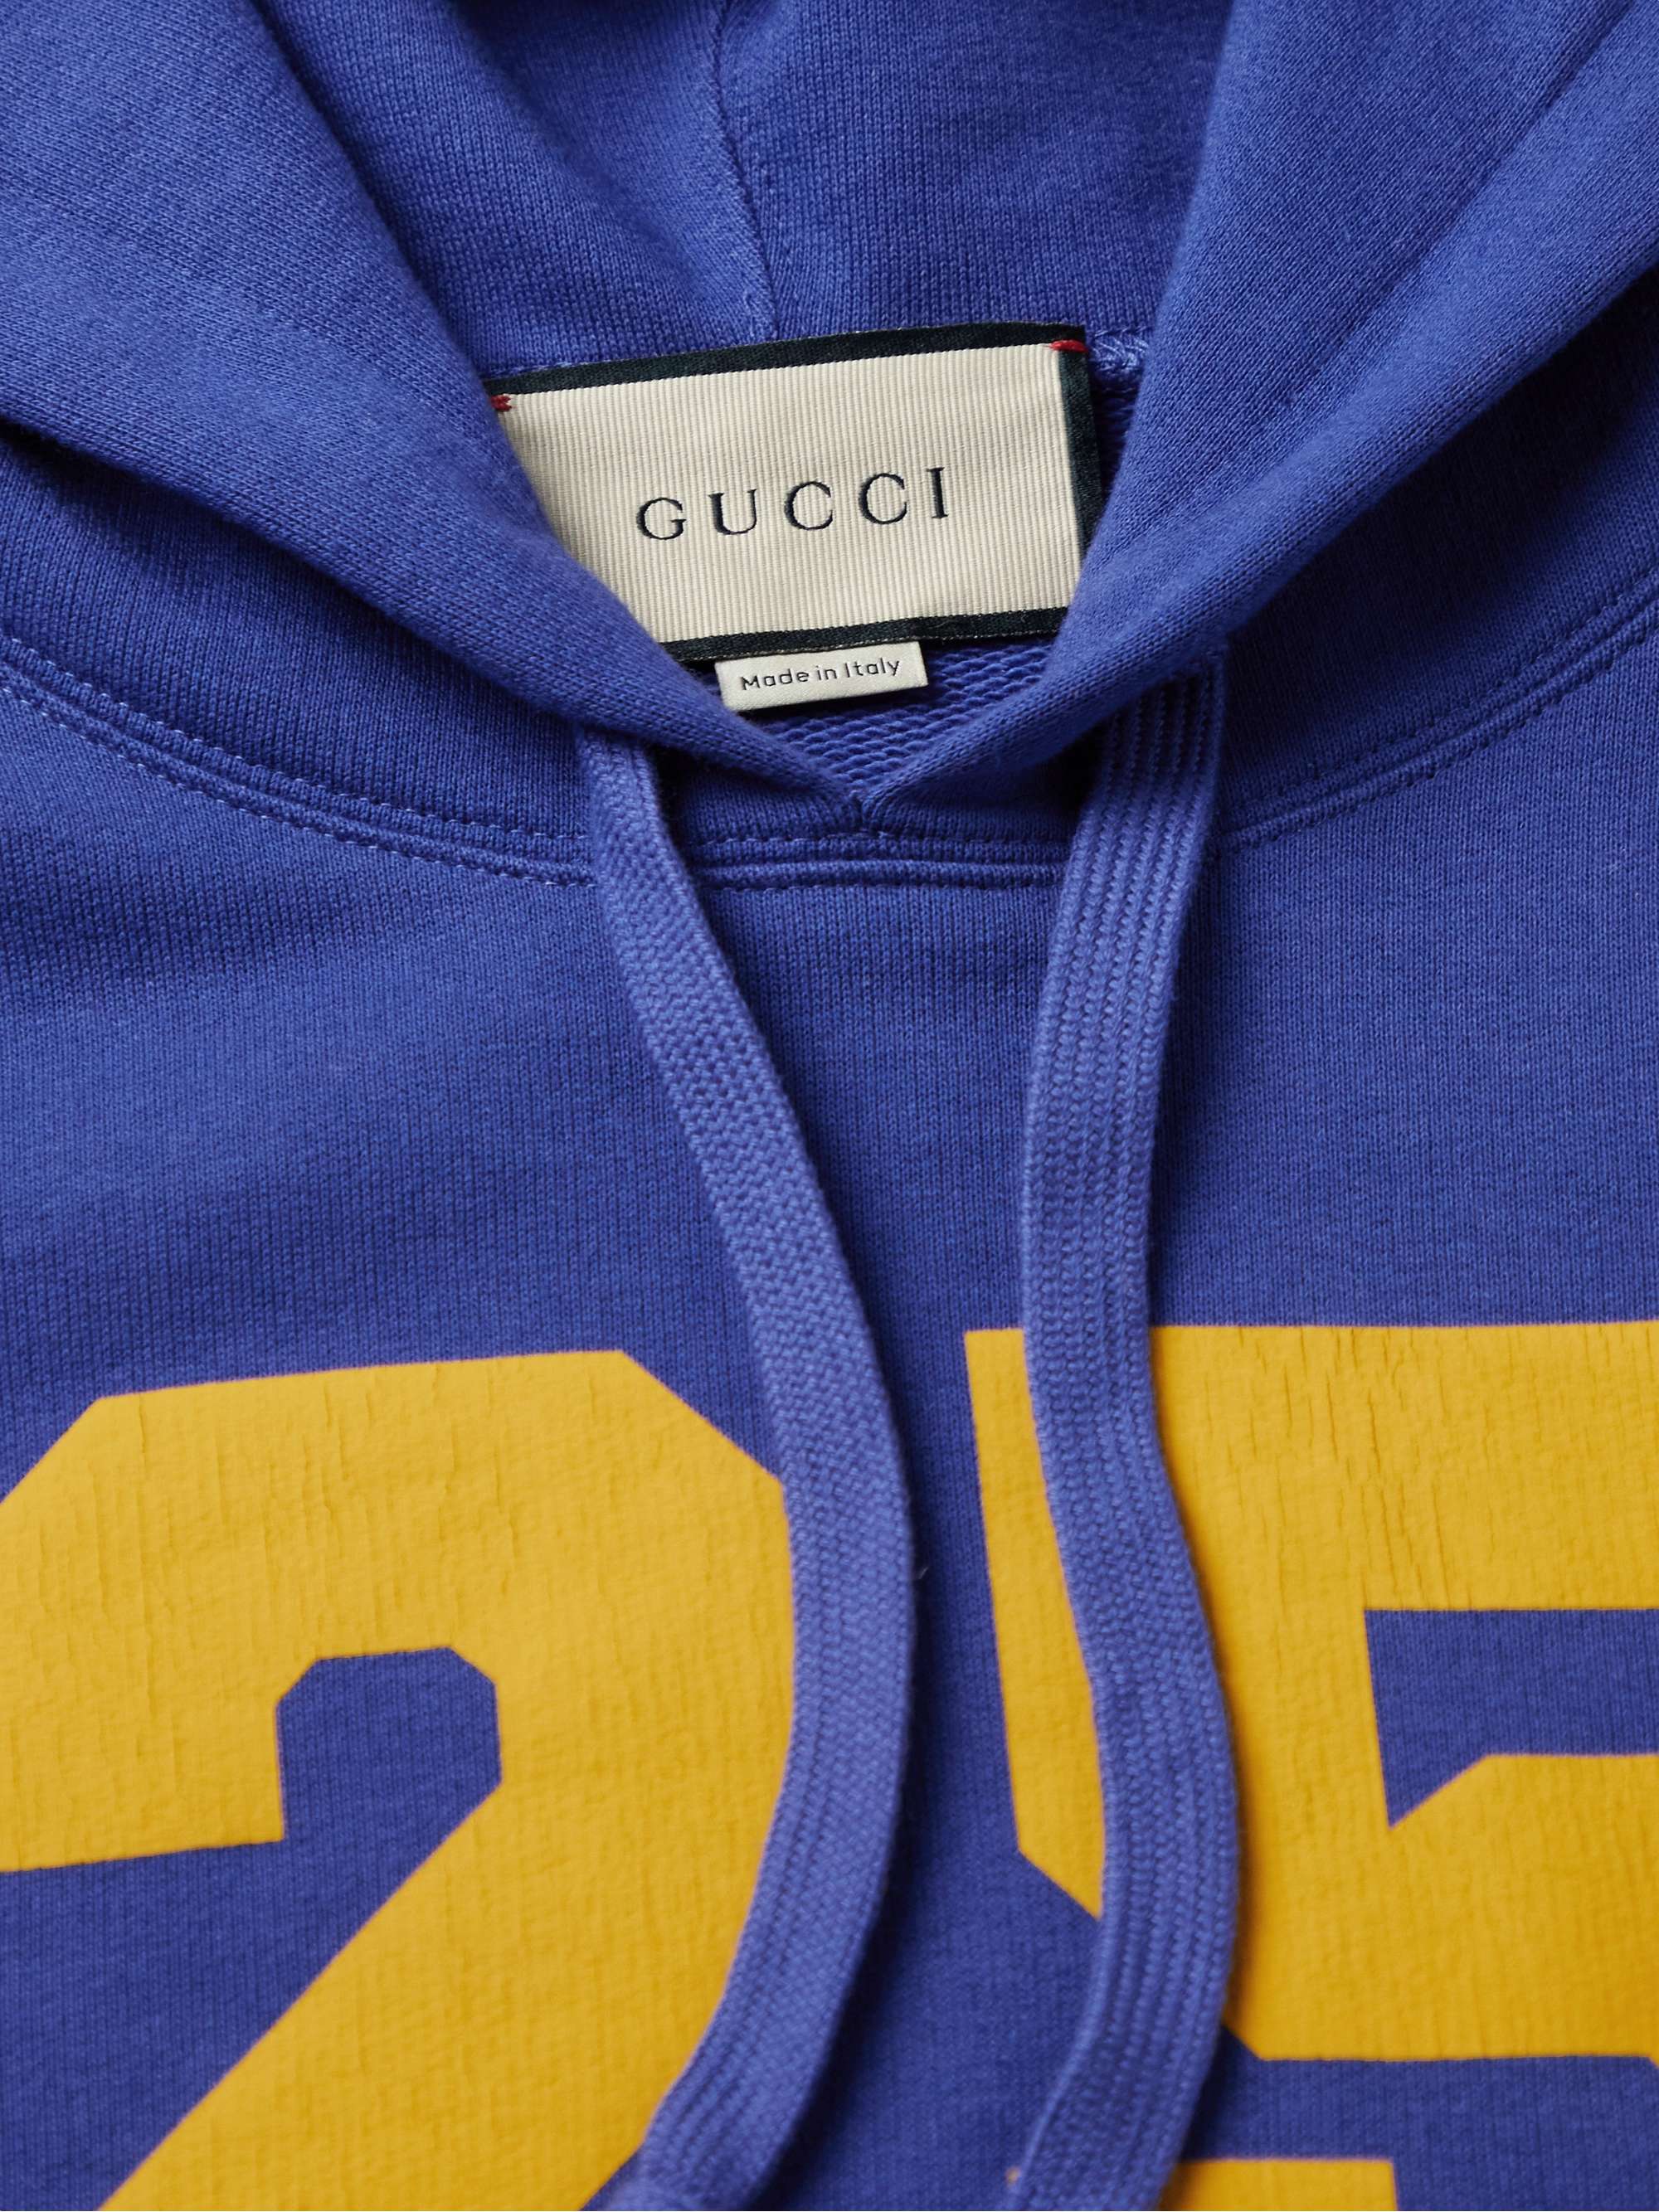 GUCCI Printed Cotton-Jersey Hoodie